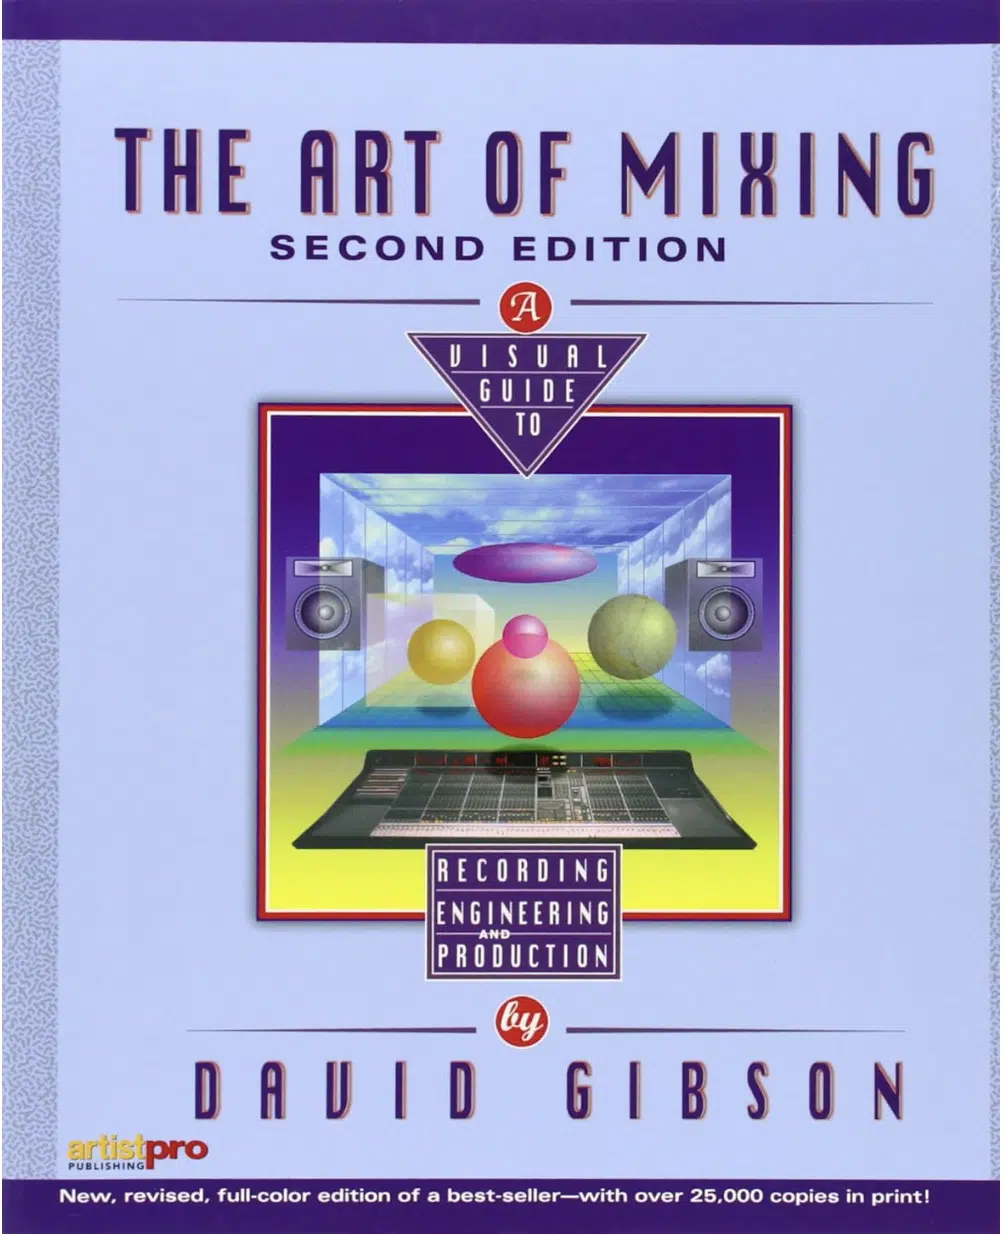 The Art of Mixing 1 - Unison